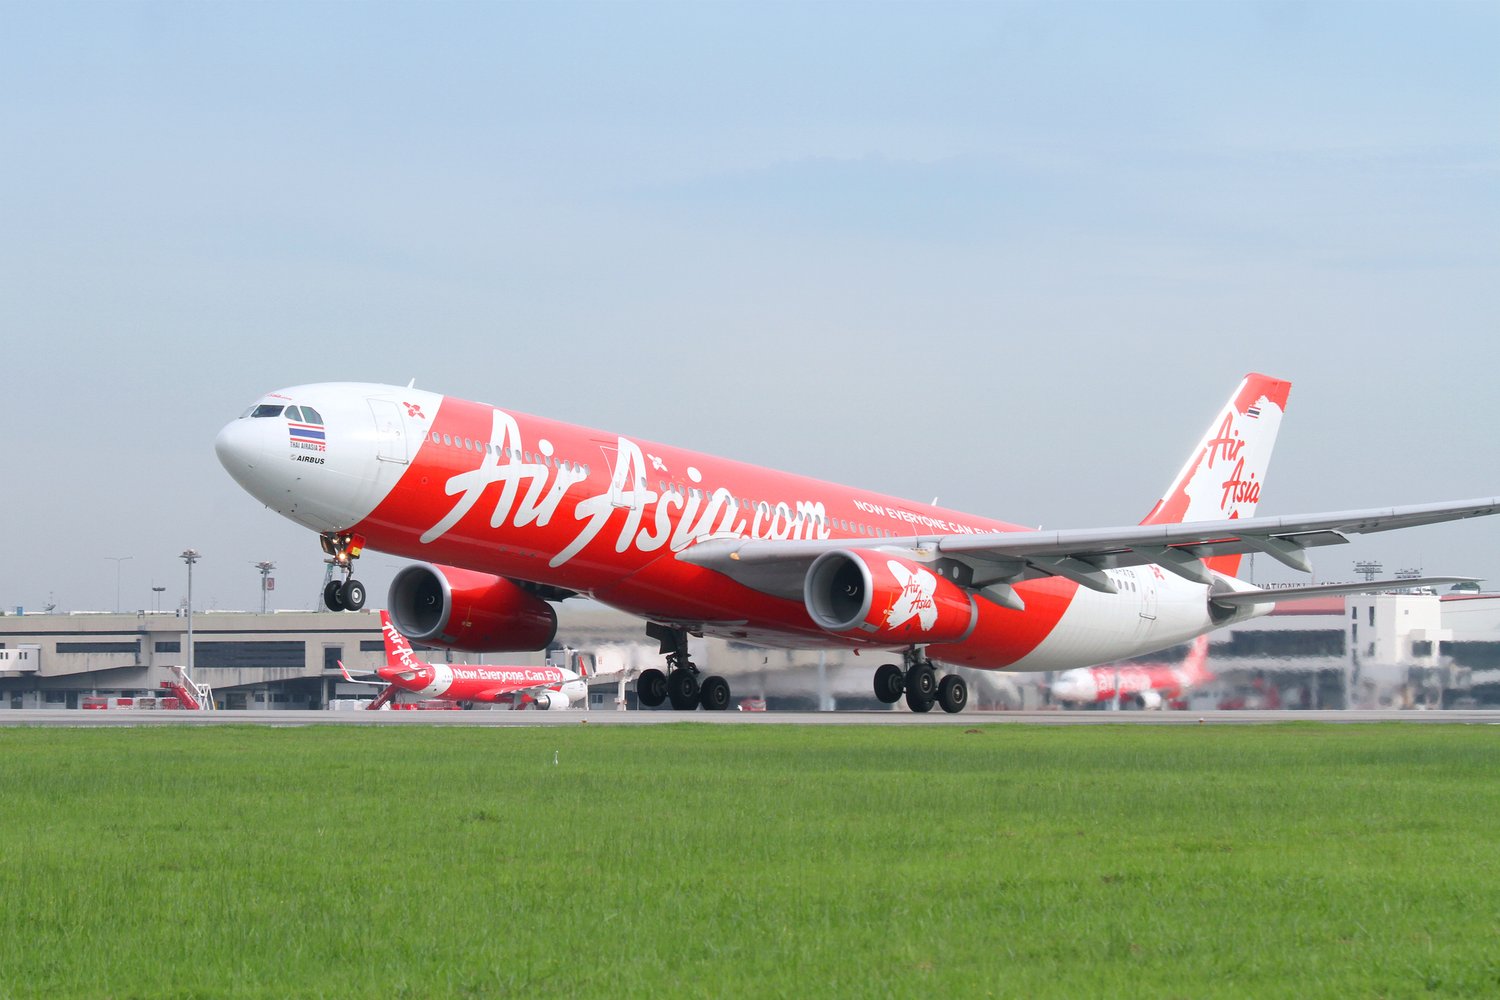 AirAsia X flights to Haneda Airport operating as scheduled